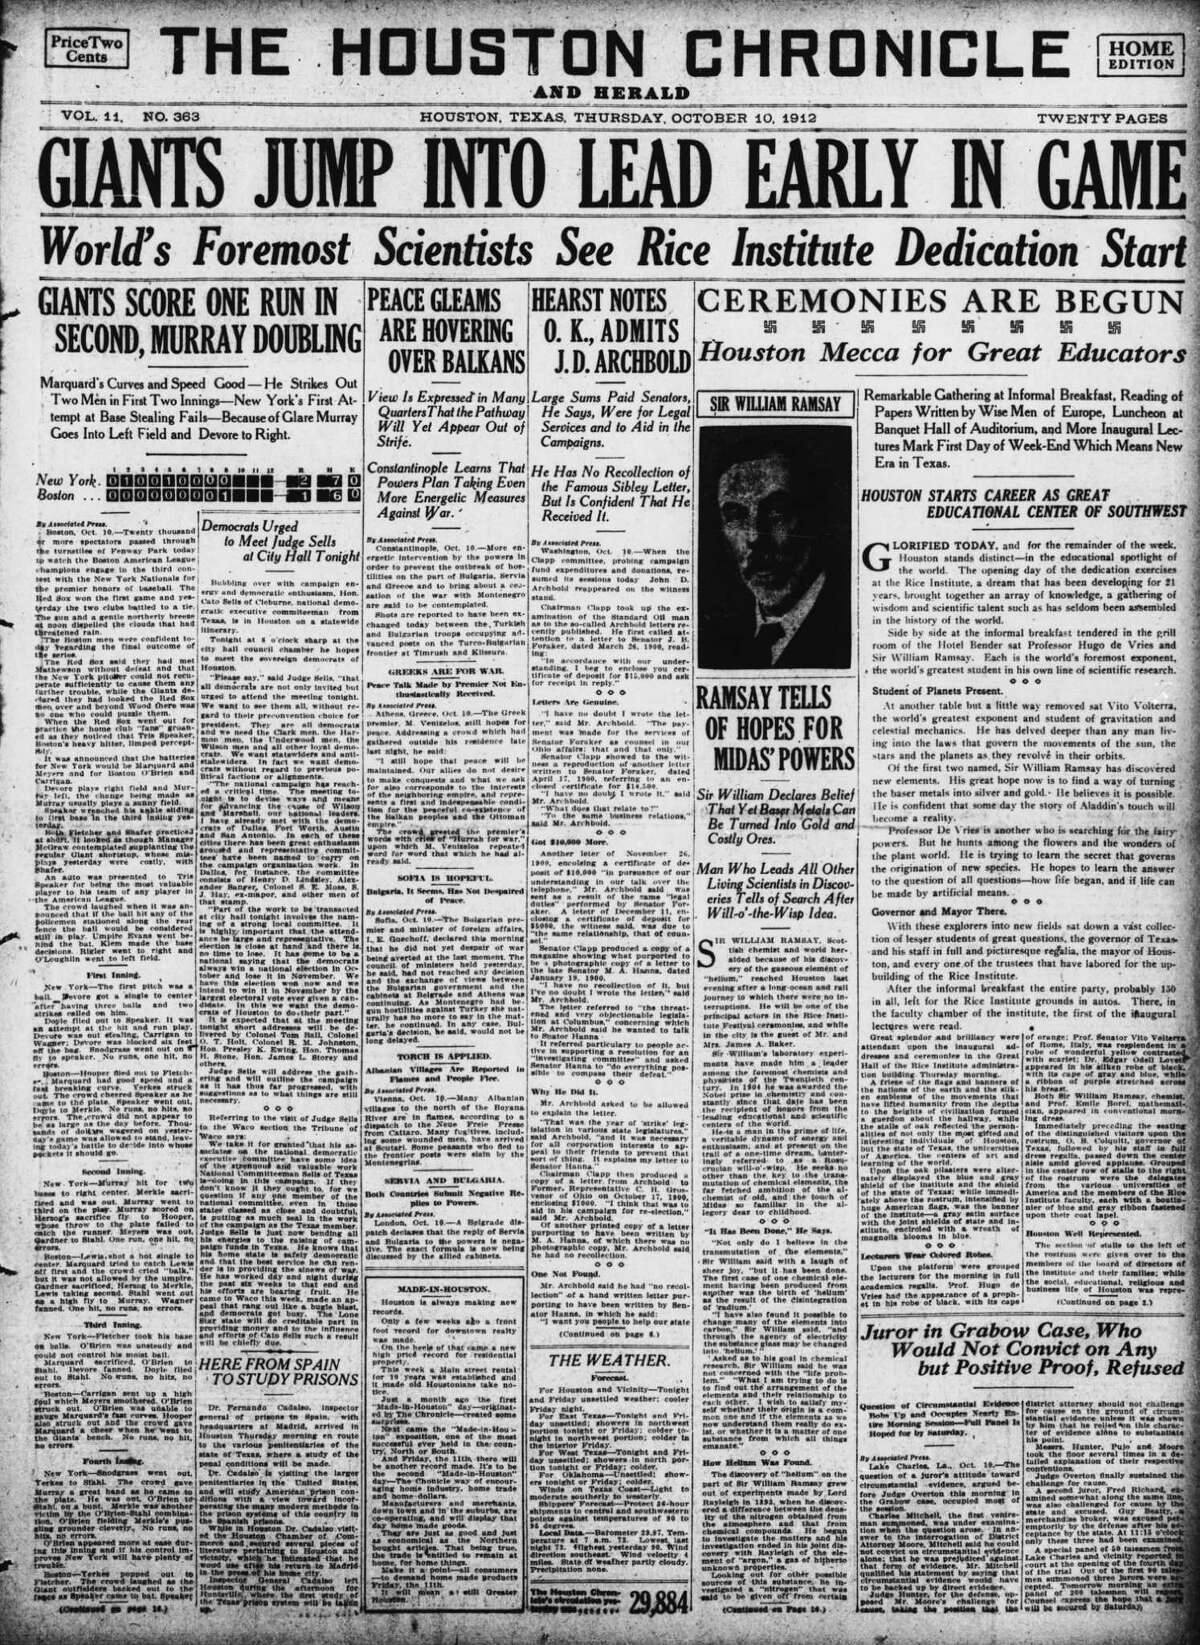 Houston Chronicle front page (HISTORIC) -- October 10, 1912 -- WORLD'S FOREMOST SCIENTISTS SEE RICE INSTITUTE DEDICATION START.